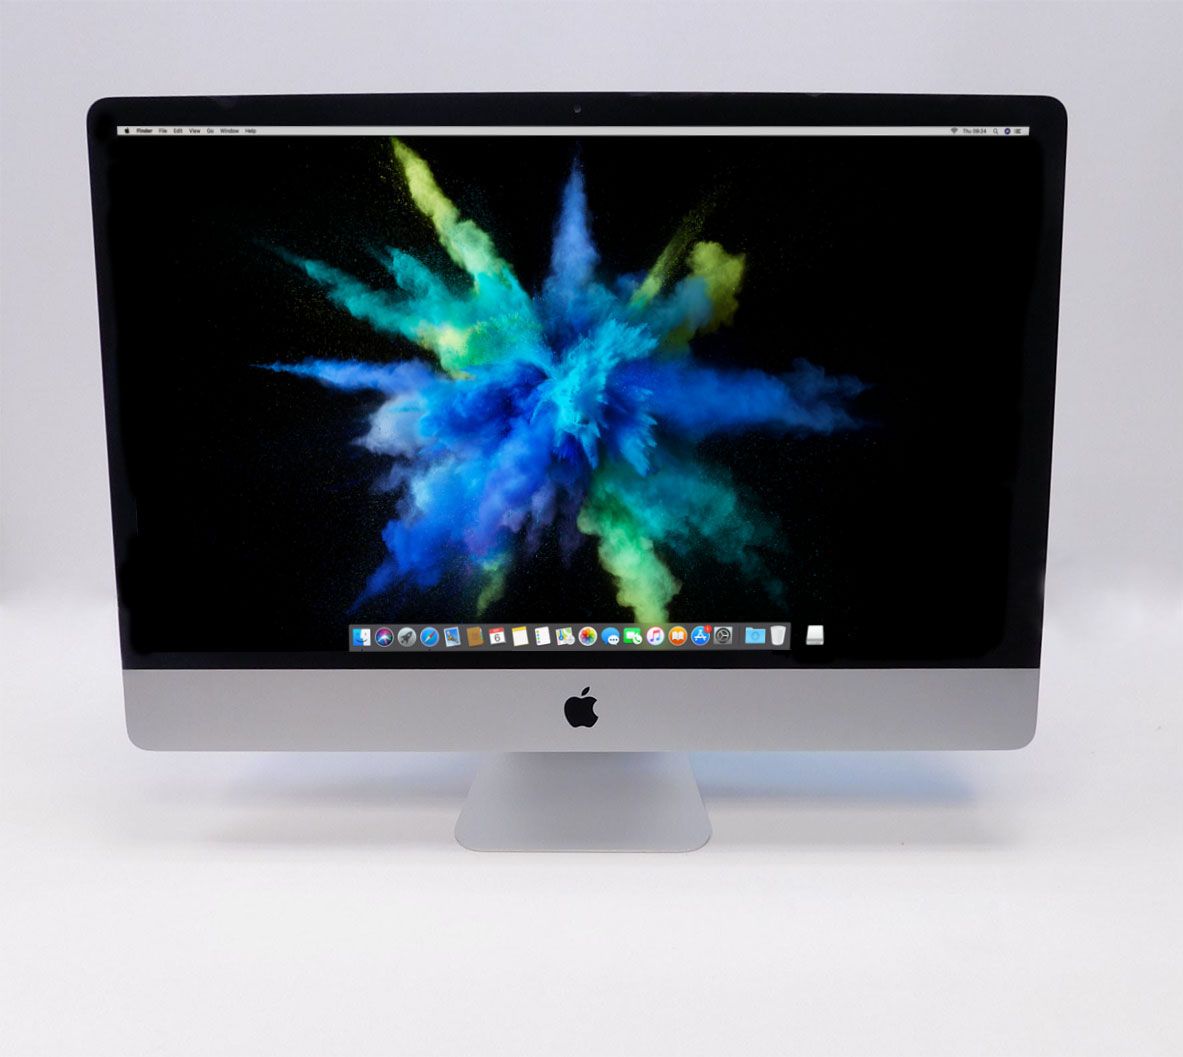 Apple iMac All-in-one A1418 21.5" Late 2015 Core i5 Turbo 2.70GHz 8GB 1TB HDD